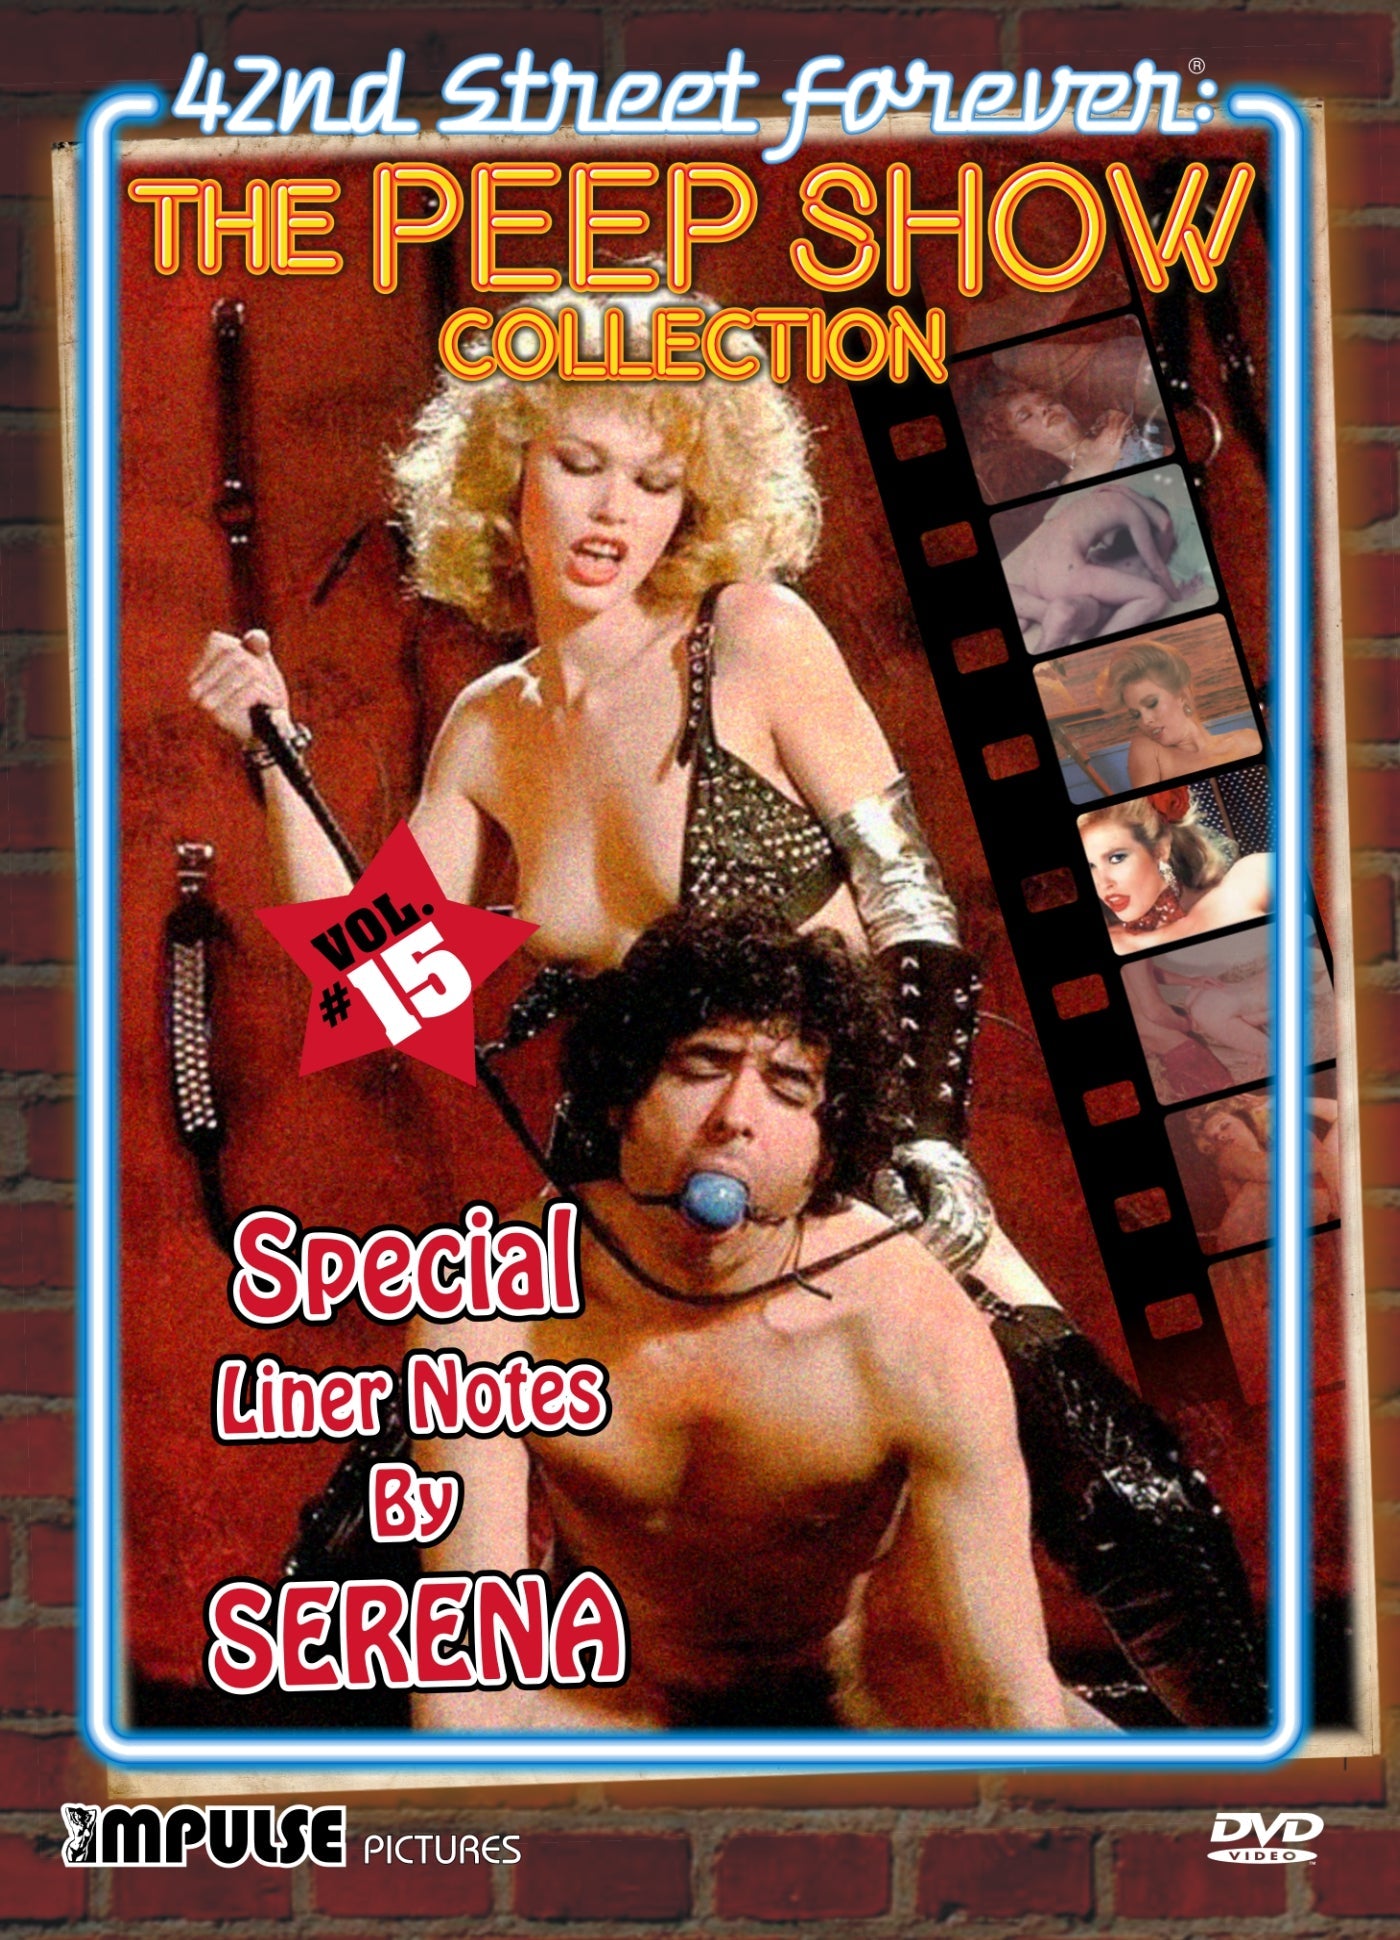 42Nd Street Forever: The Peep Show Collection Volume 15 Dvd